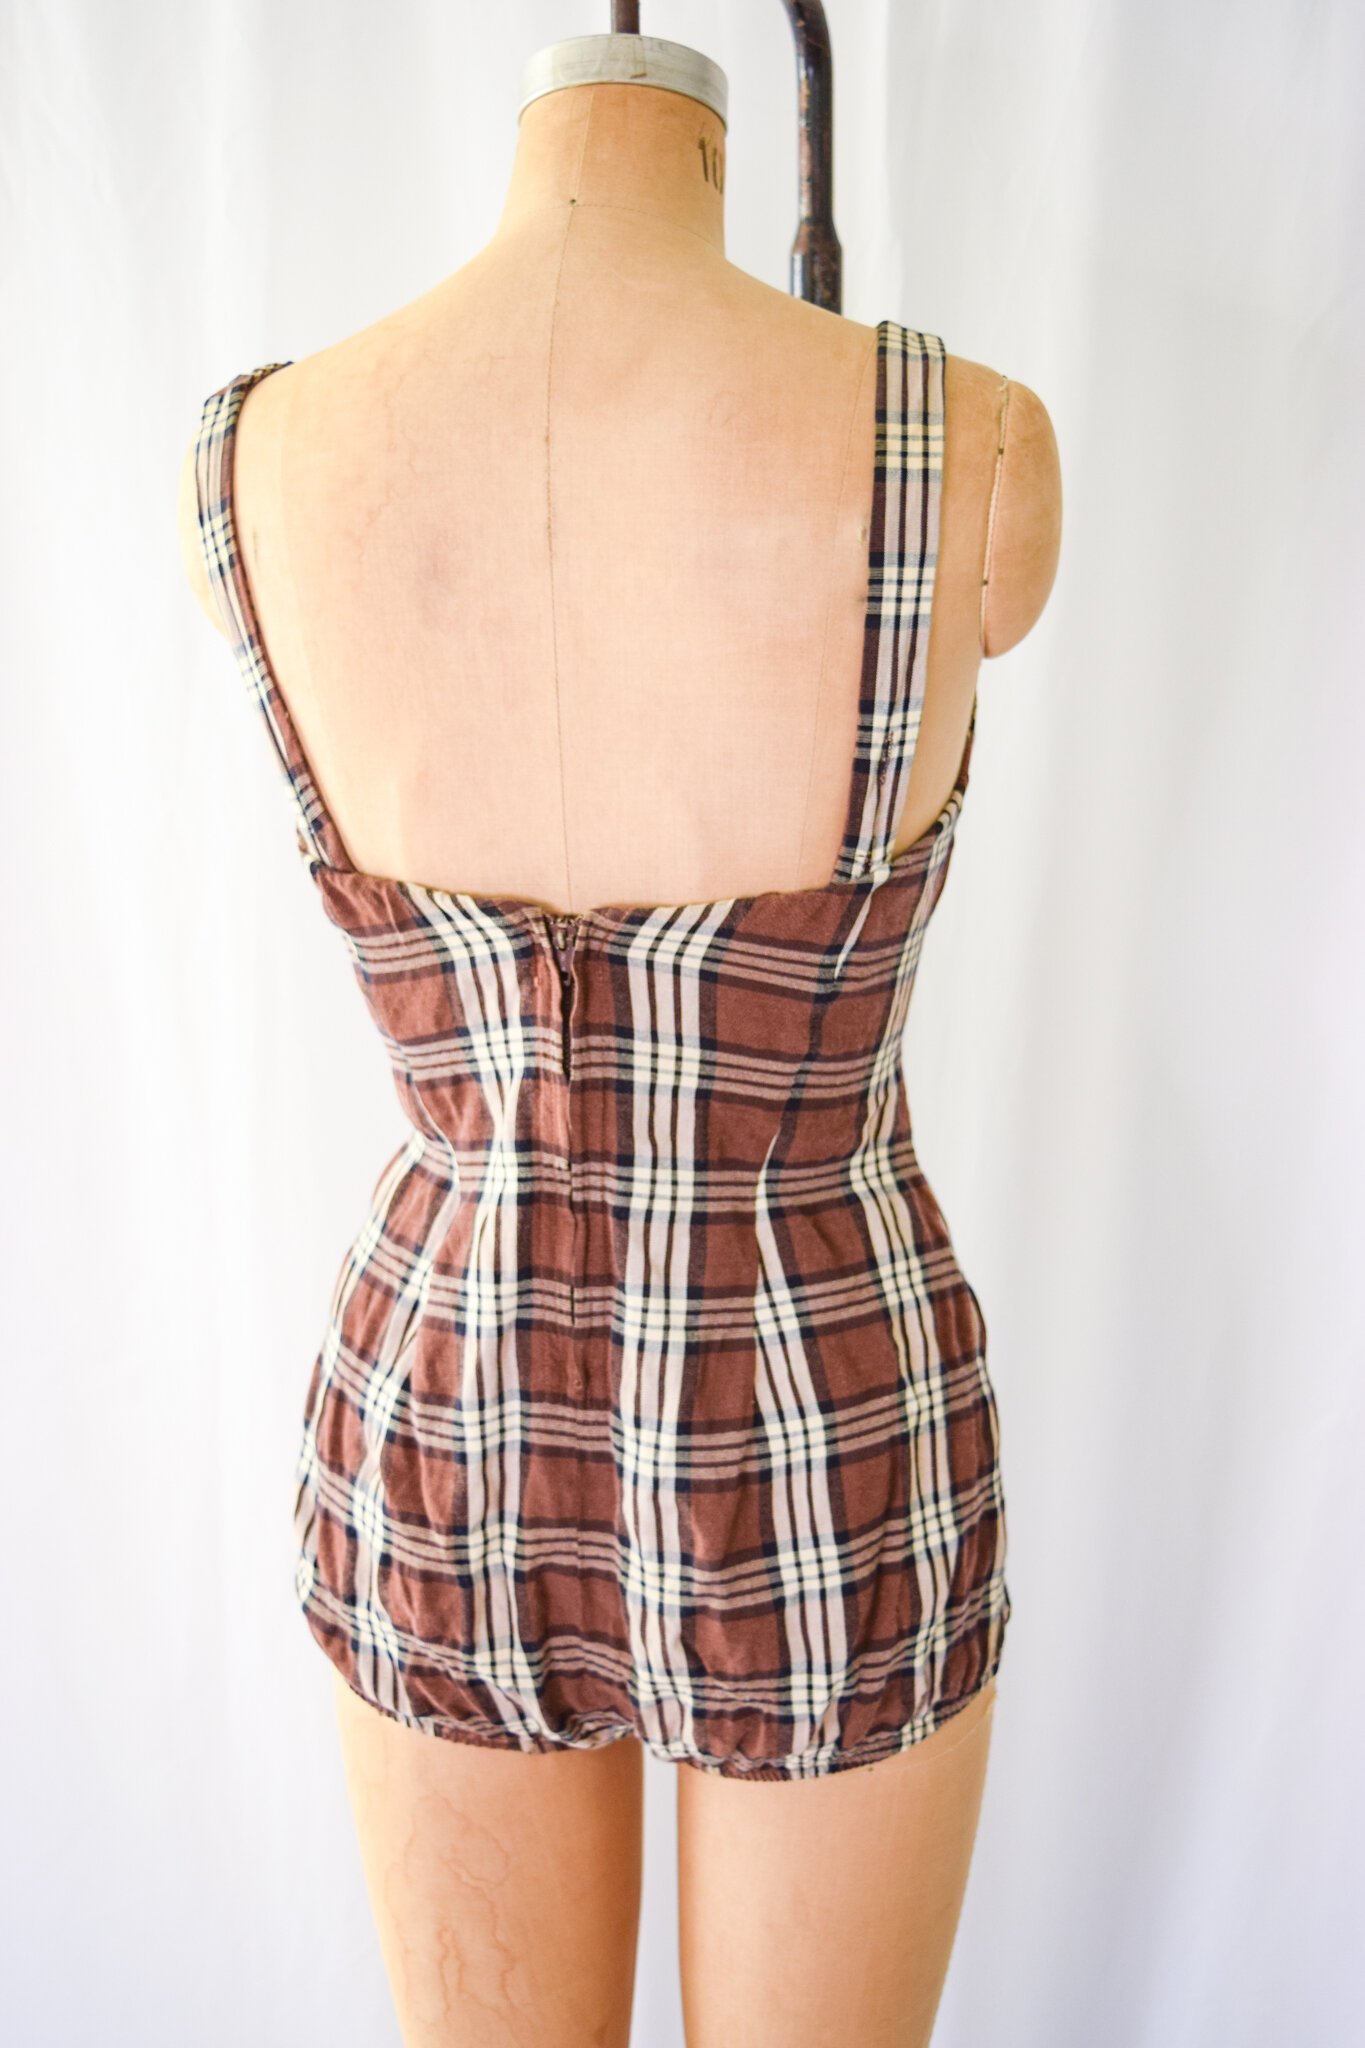 Marina del Mar. Vintage 1950s Brown Plaid One Piece Swimsuit Documented ...